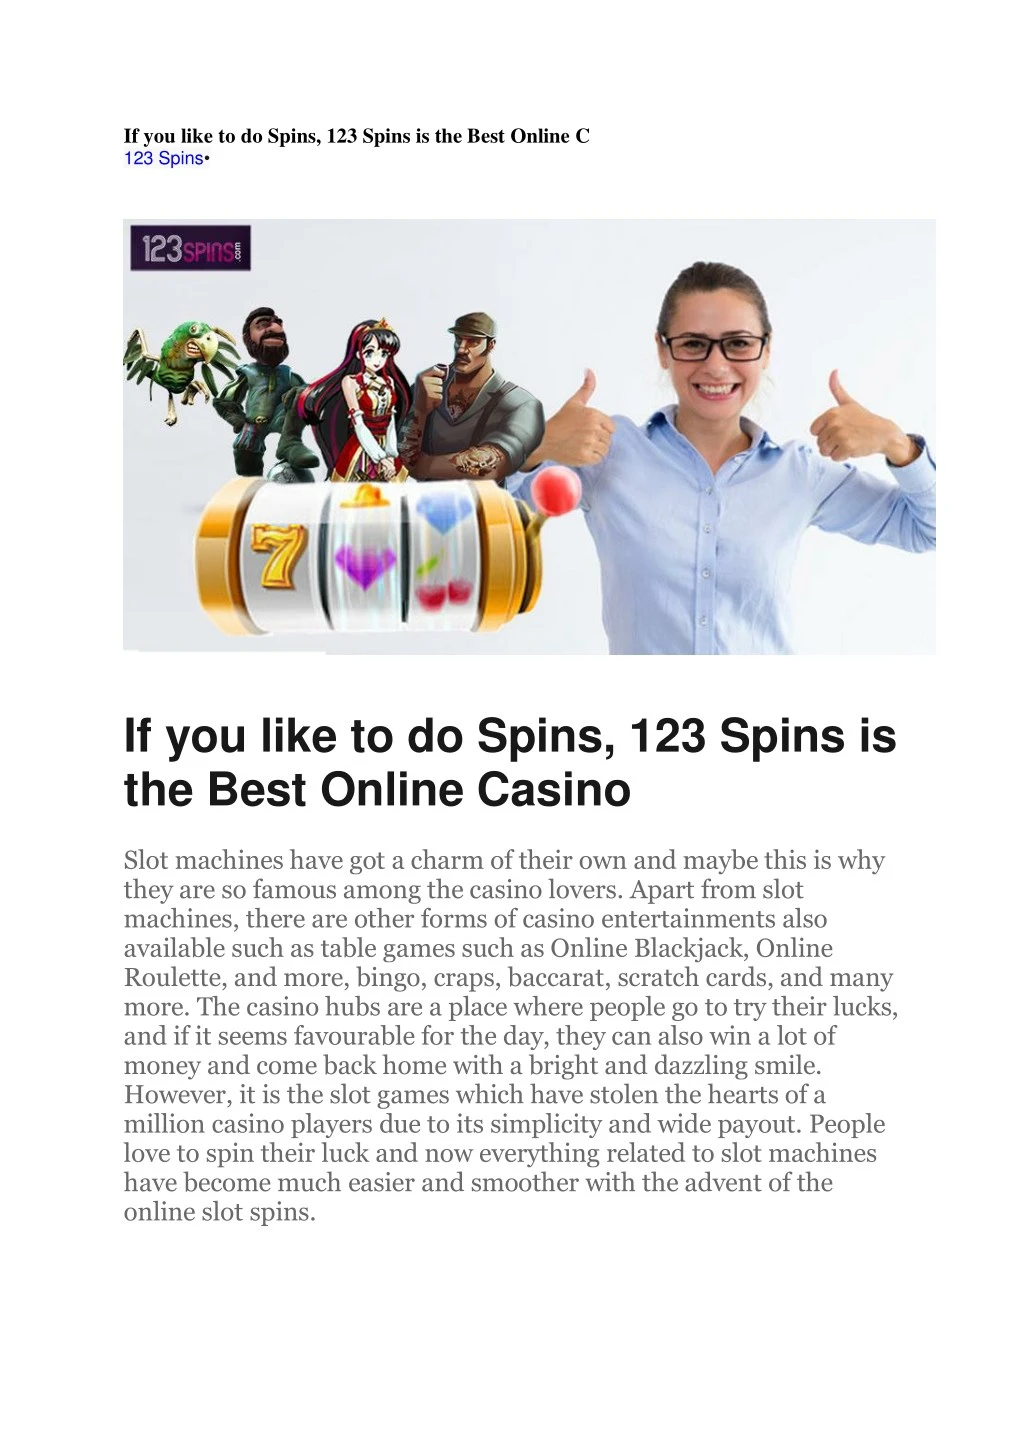 if you like to do spins 123 spins is the best n.